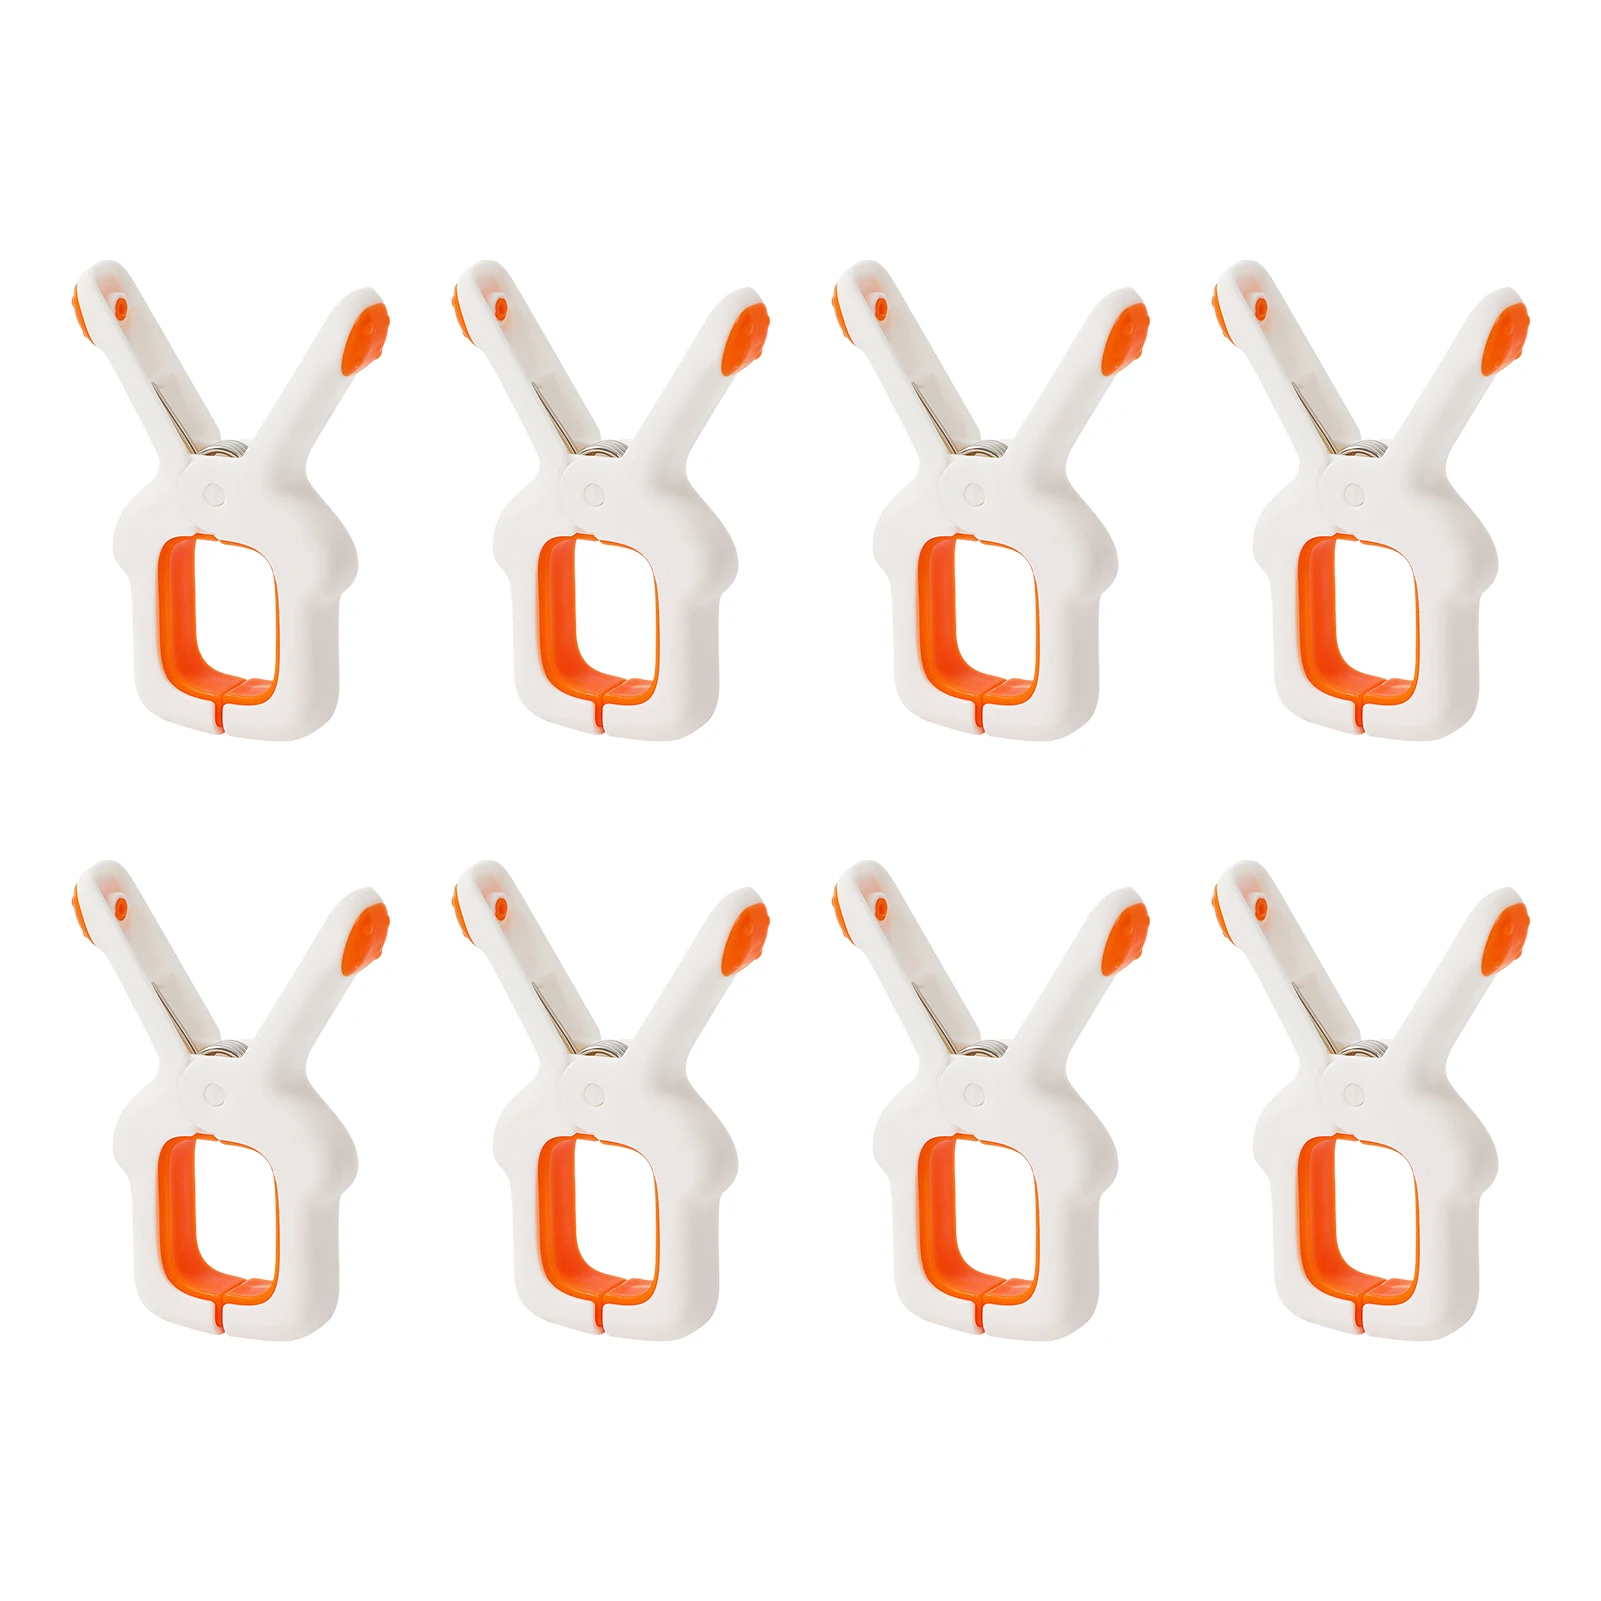 

8pcs Lounge Beach Extra Large PP Clothes Pegs Laundry Quilt Windproof Strong Grip Pool Chair Towel Clip White Orange Blanket